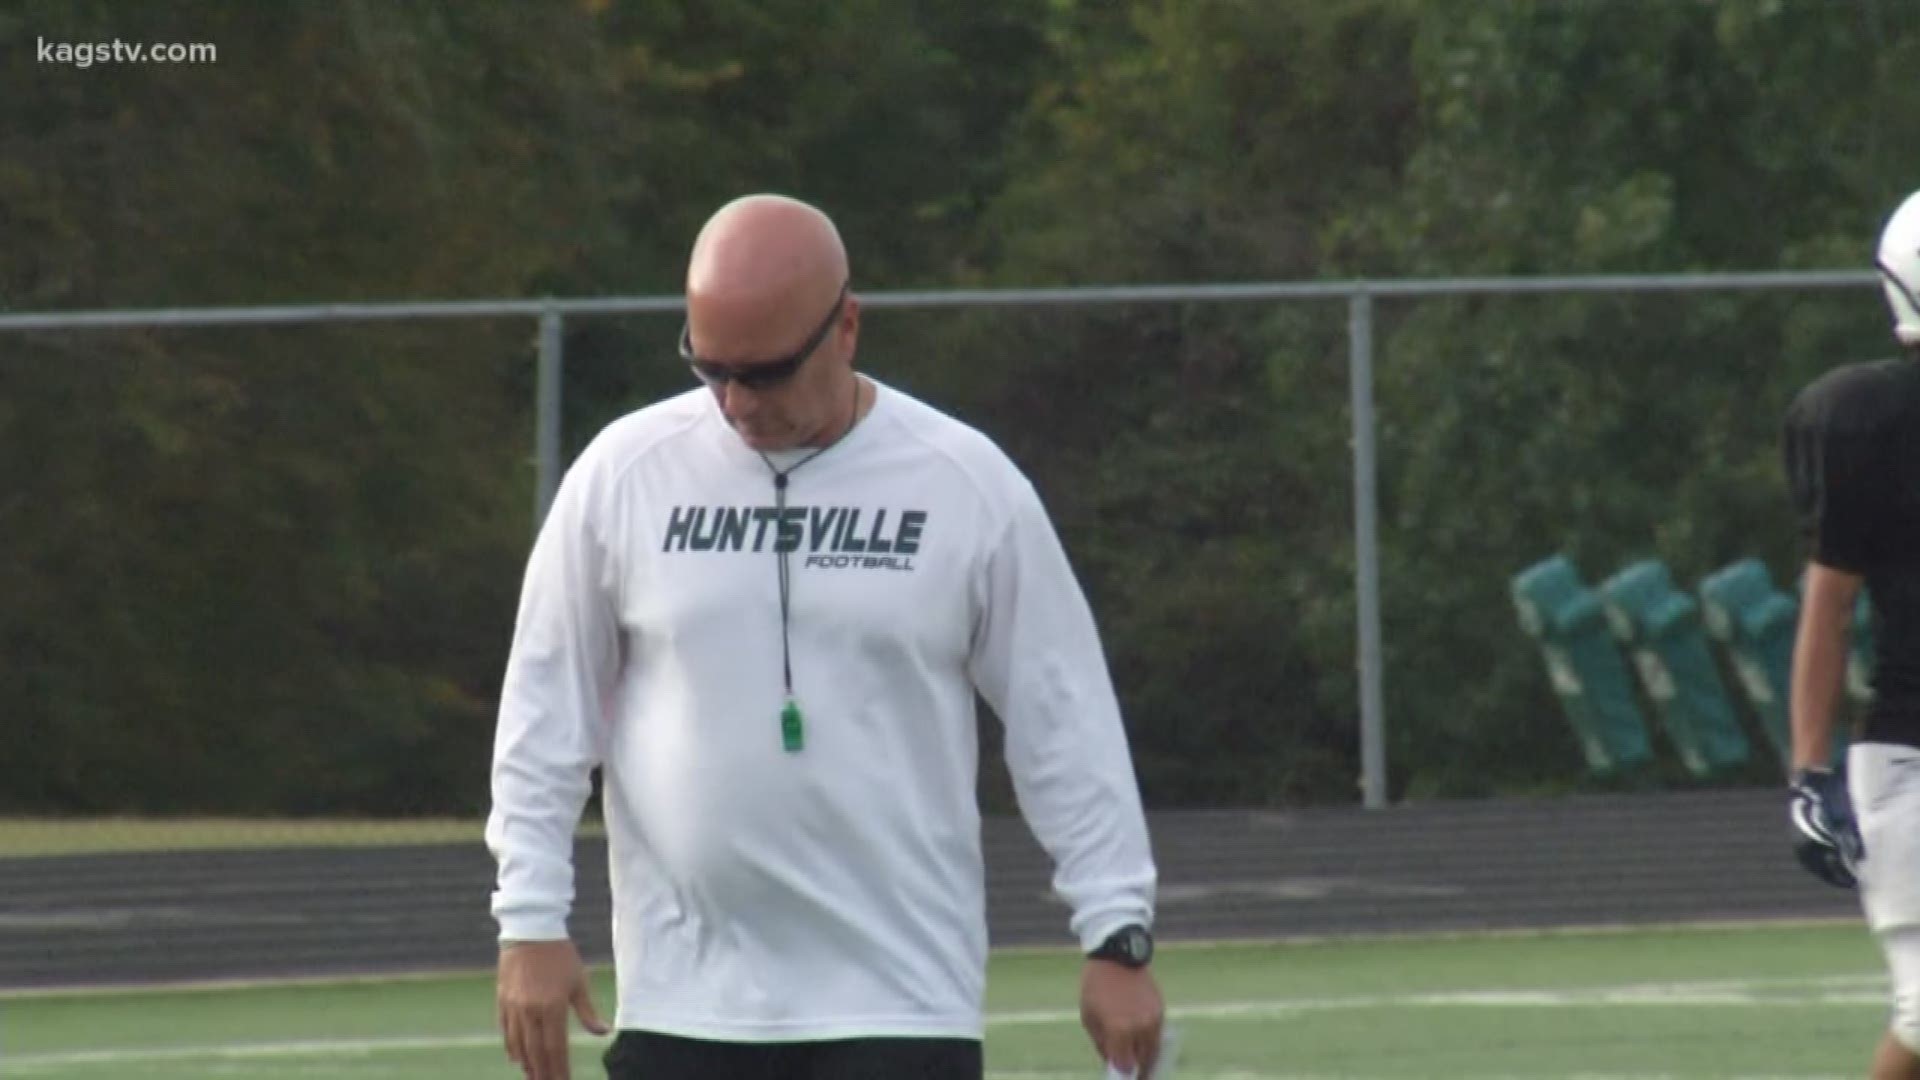 For the first time since 1990, the Huntsville football team is in the Class 5A Division II regional semifinals. In addition, Hornets head coach Rodney Southern will face his former program in the Marshall Mavericks on Saturday night.